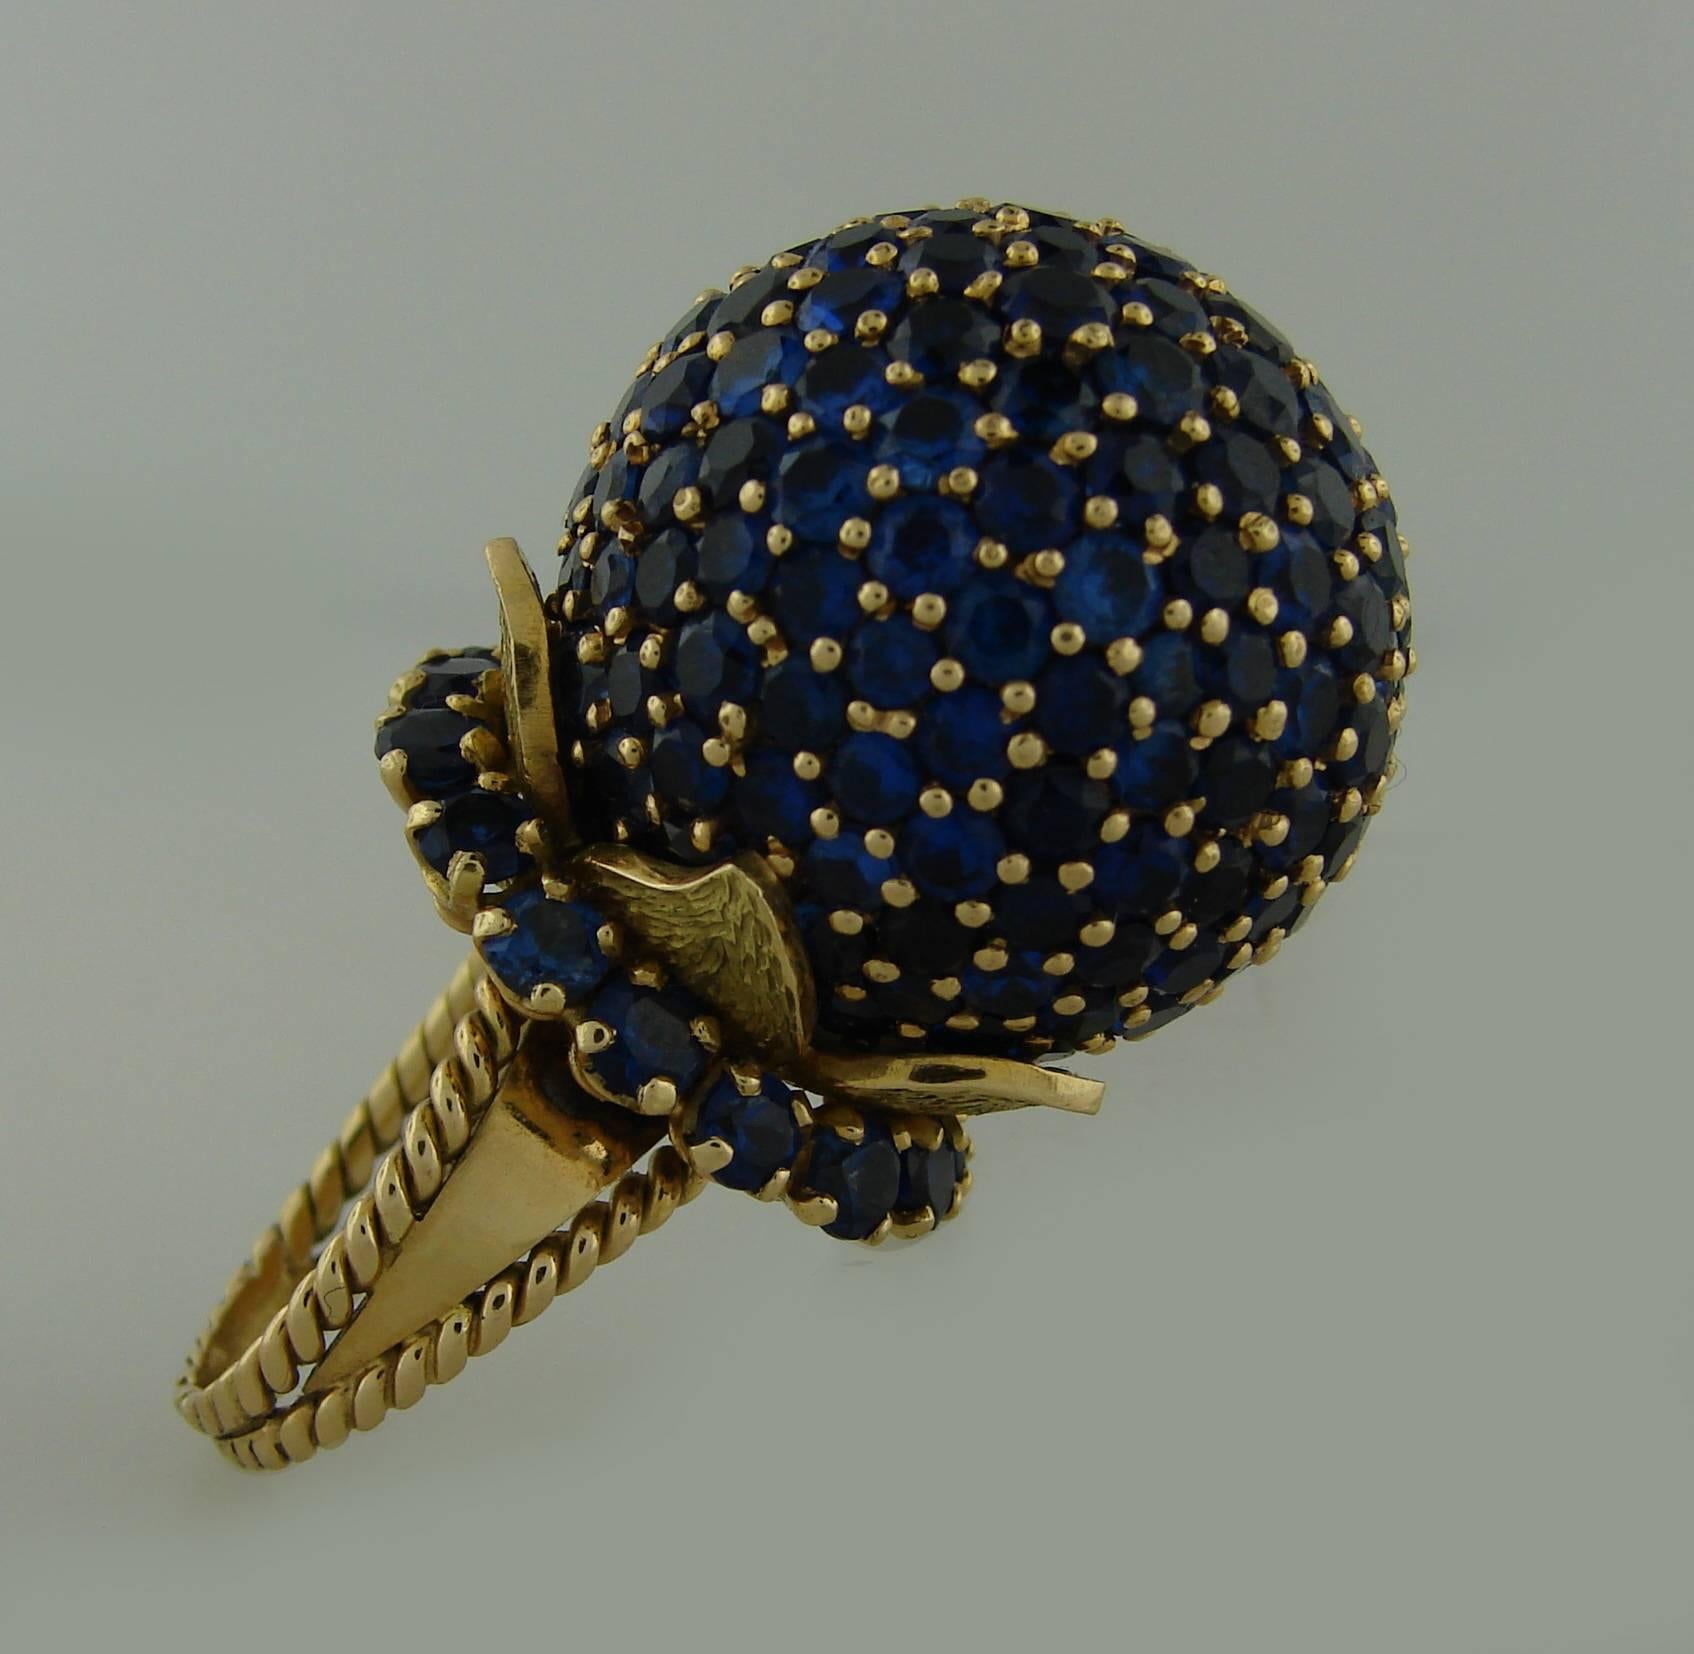 Stunning cocktail ring created in the 1970's. Definitely a conversational piece! Bold, chic, stylish and elegant, it is a great addition to your jewelry collection. 
It is made of 18 karat (tested) yellow gold and encrusted with round faceted